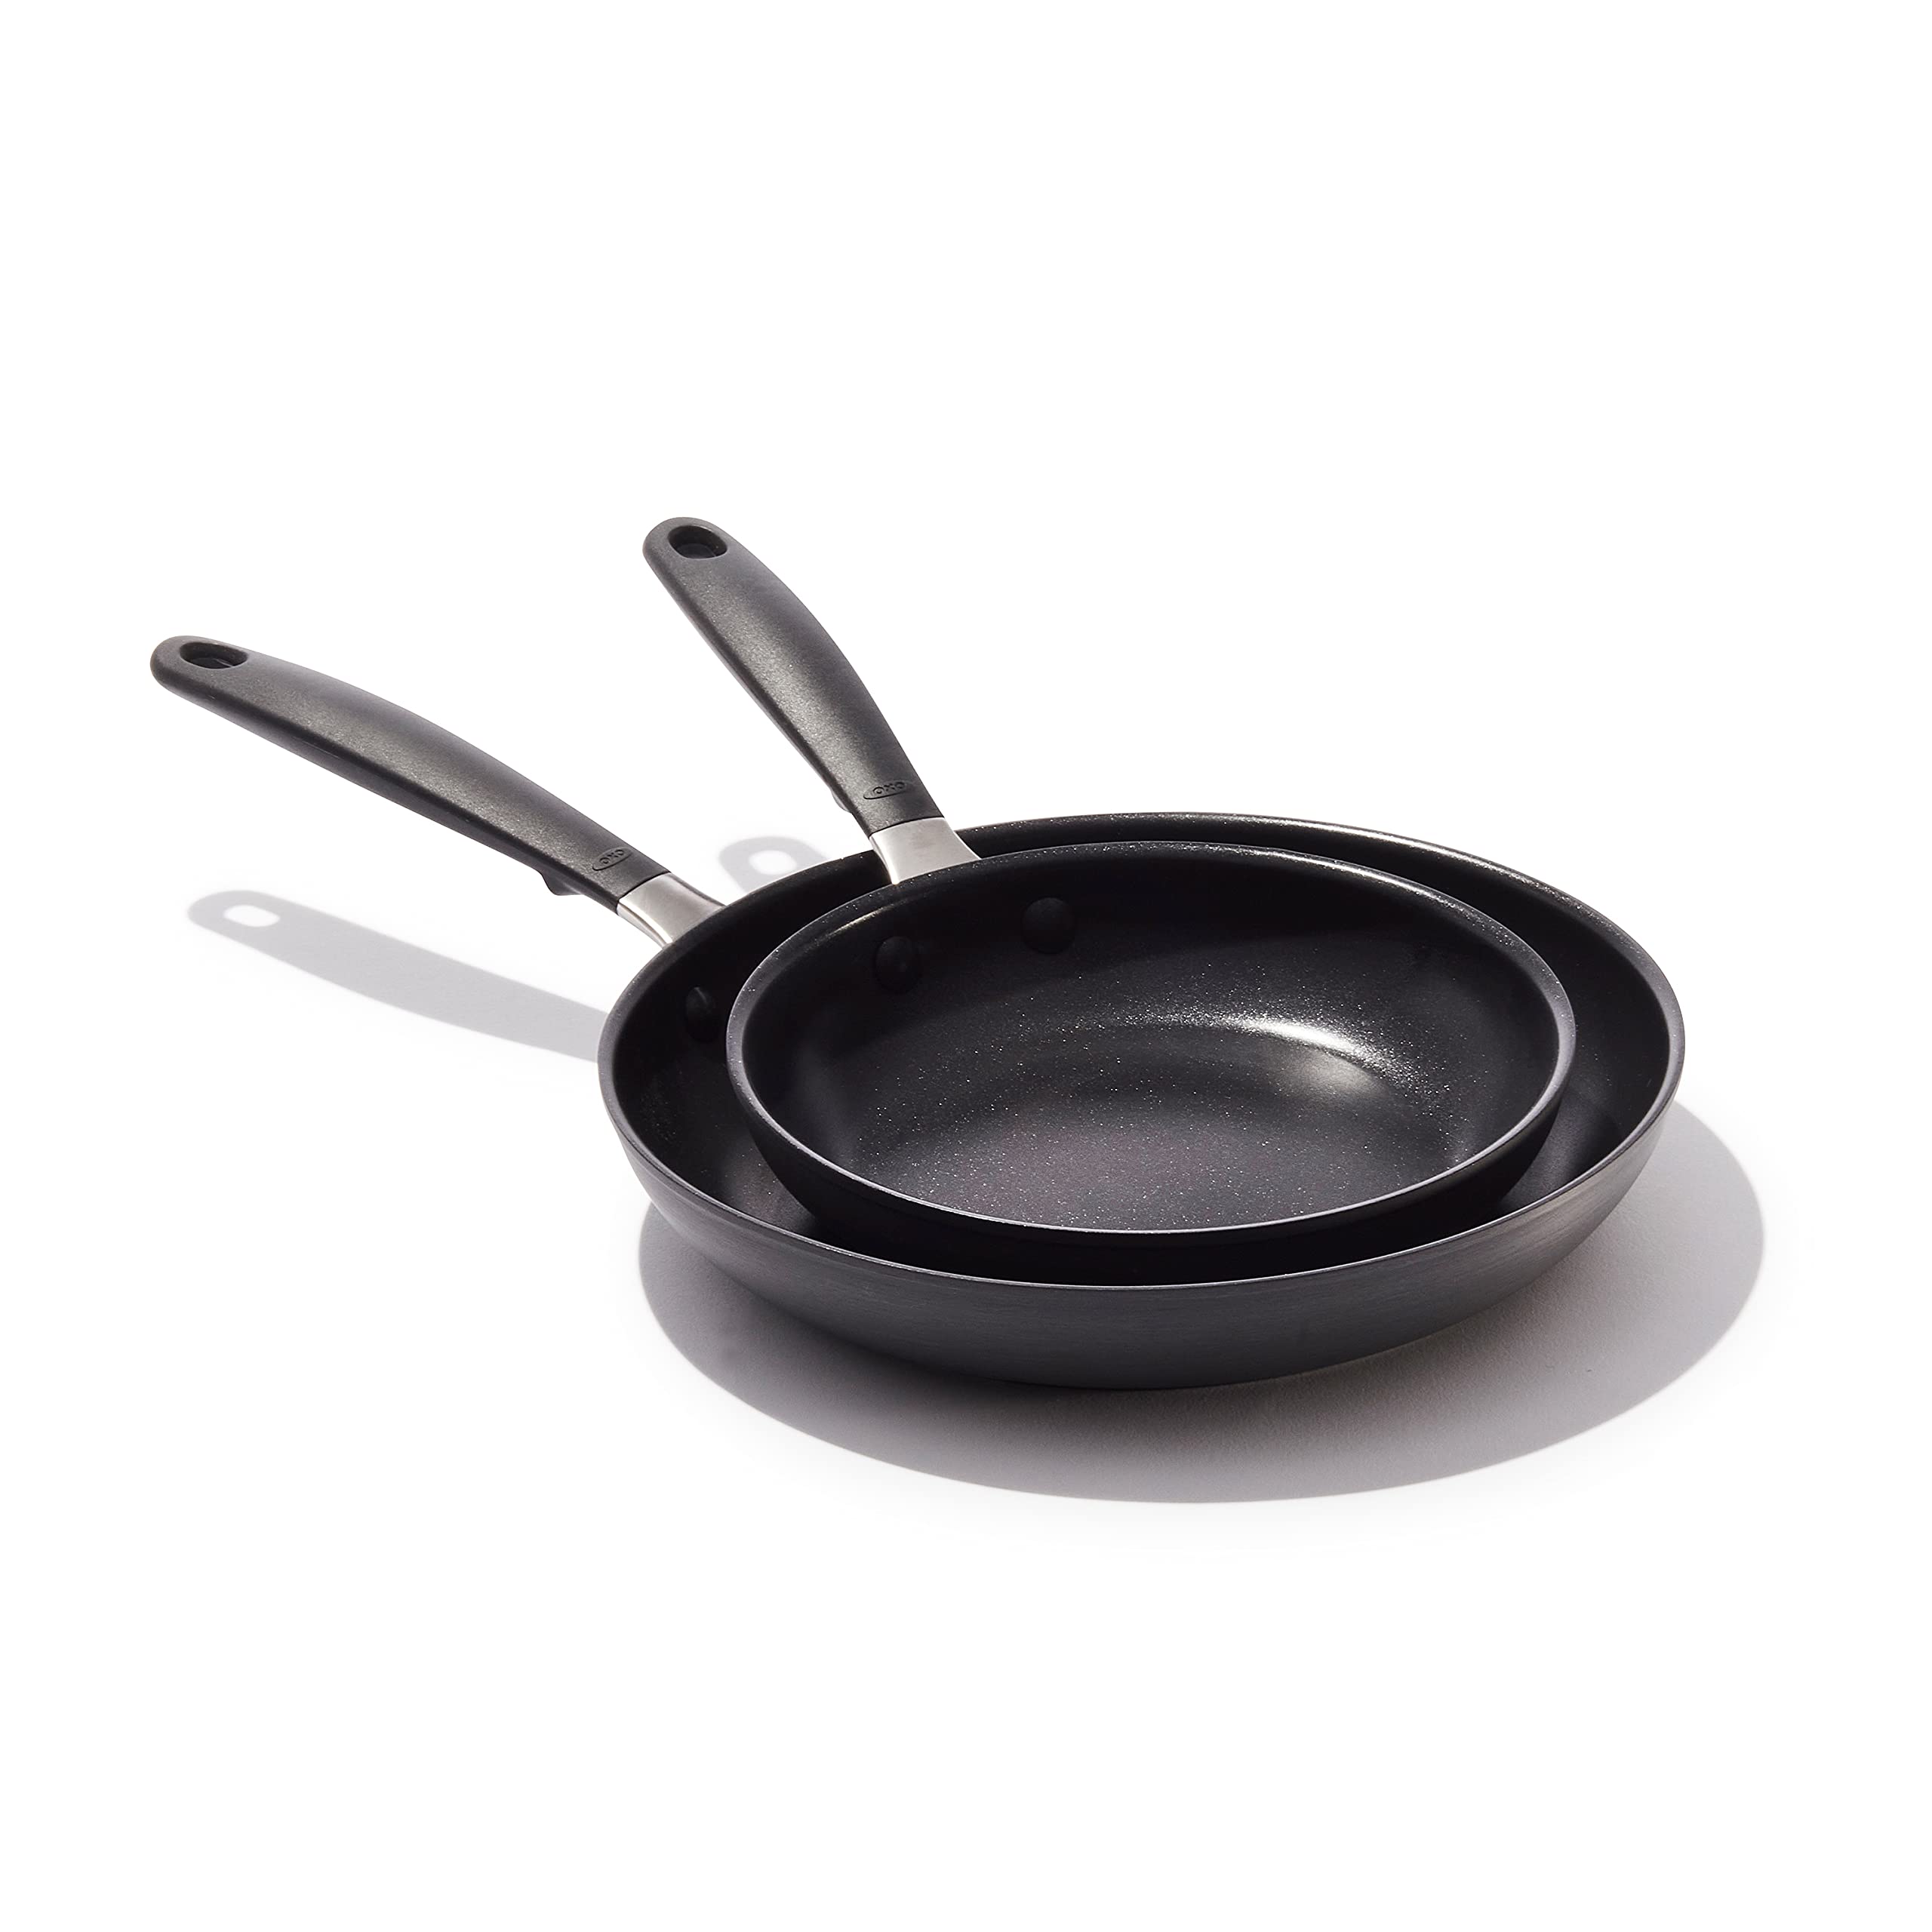 2-Count OXO Good Grips 8" and 10" Frying Pan Skillet Set Stainless Steel Handle with Nonslip Silicone (Black) $29.80 + Free Shipping w/ Prime or on $35+